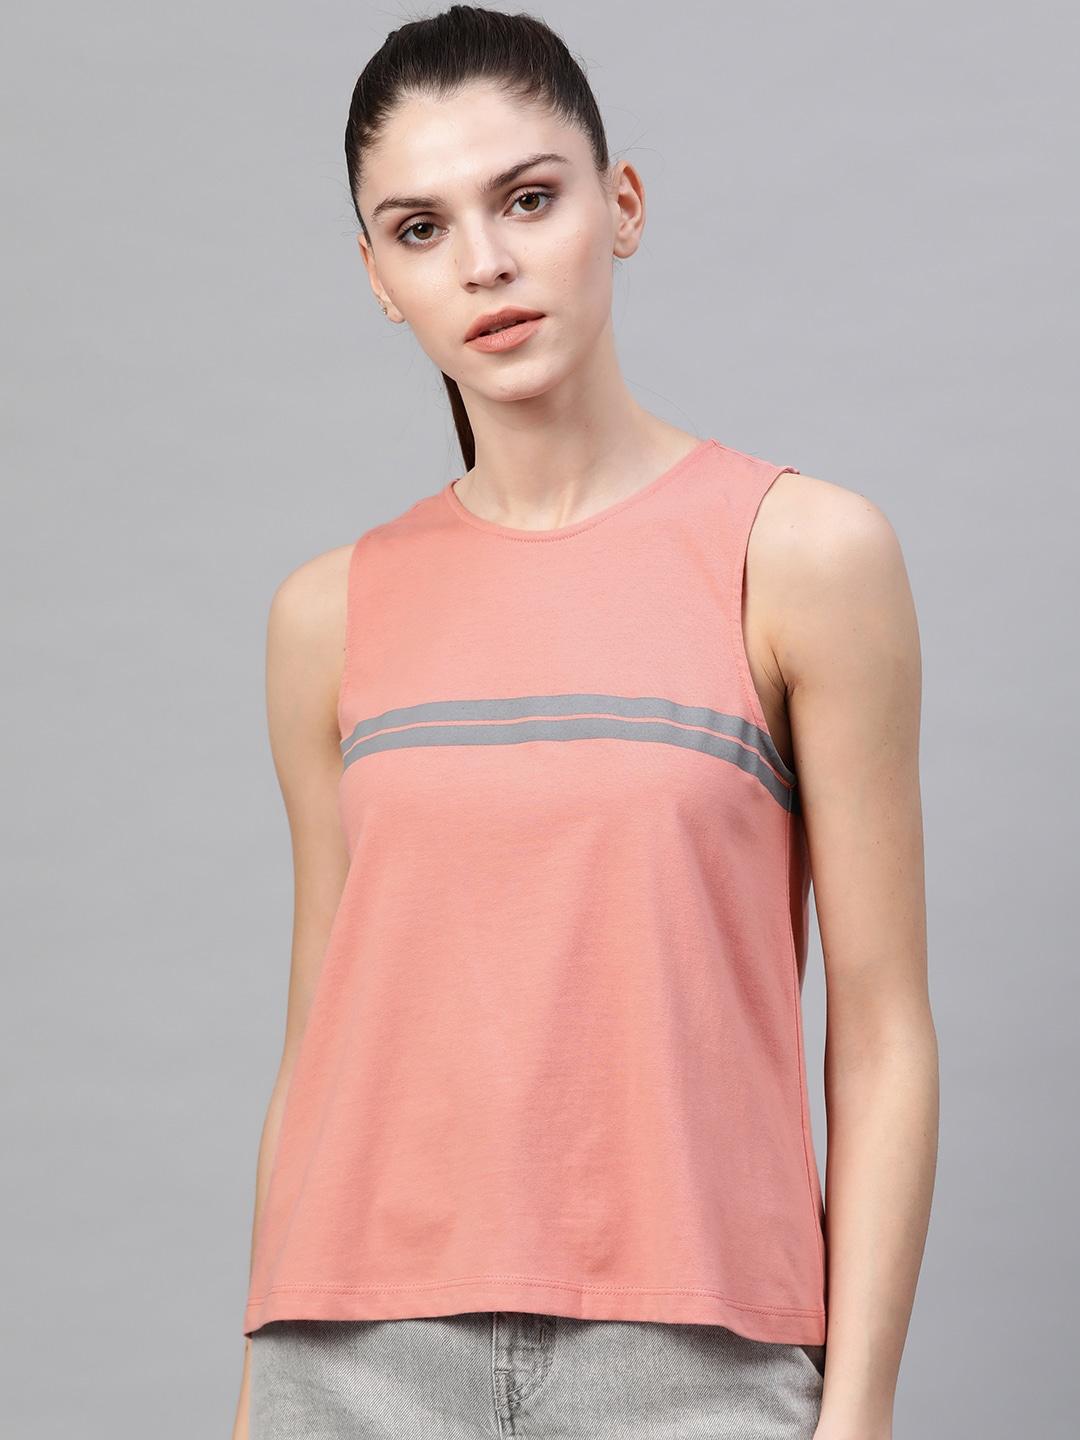 roadster-women-peach-coloured-&-blue-striped-relaxed-fit-cotton-top